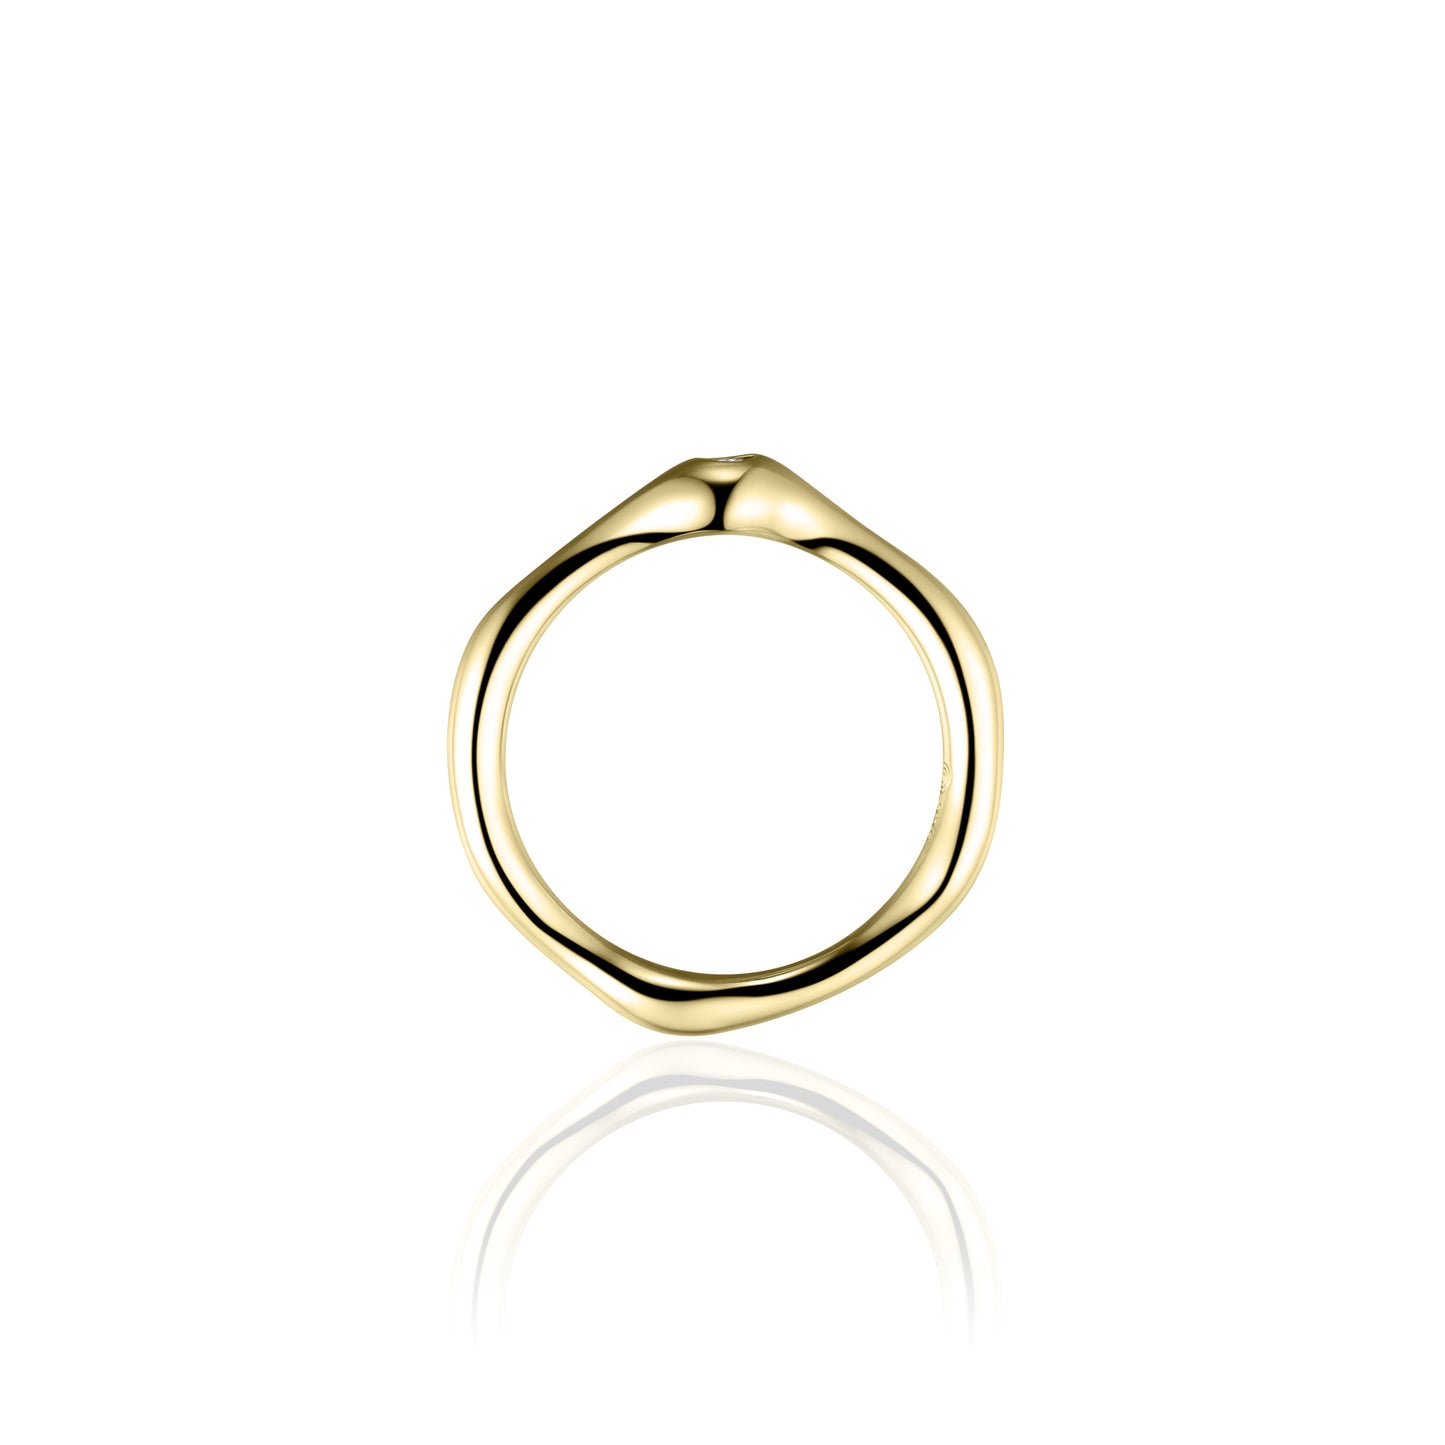 ORGANIC CZ Solitaire Ring - Gold - John Ross Jewellers